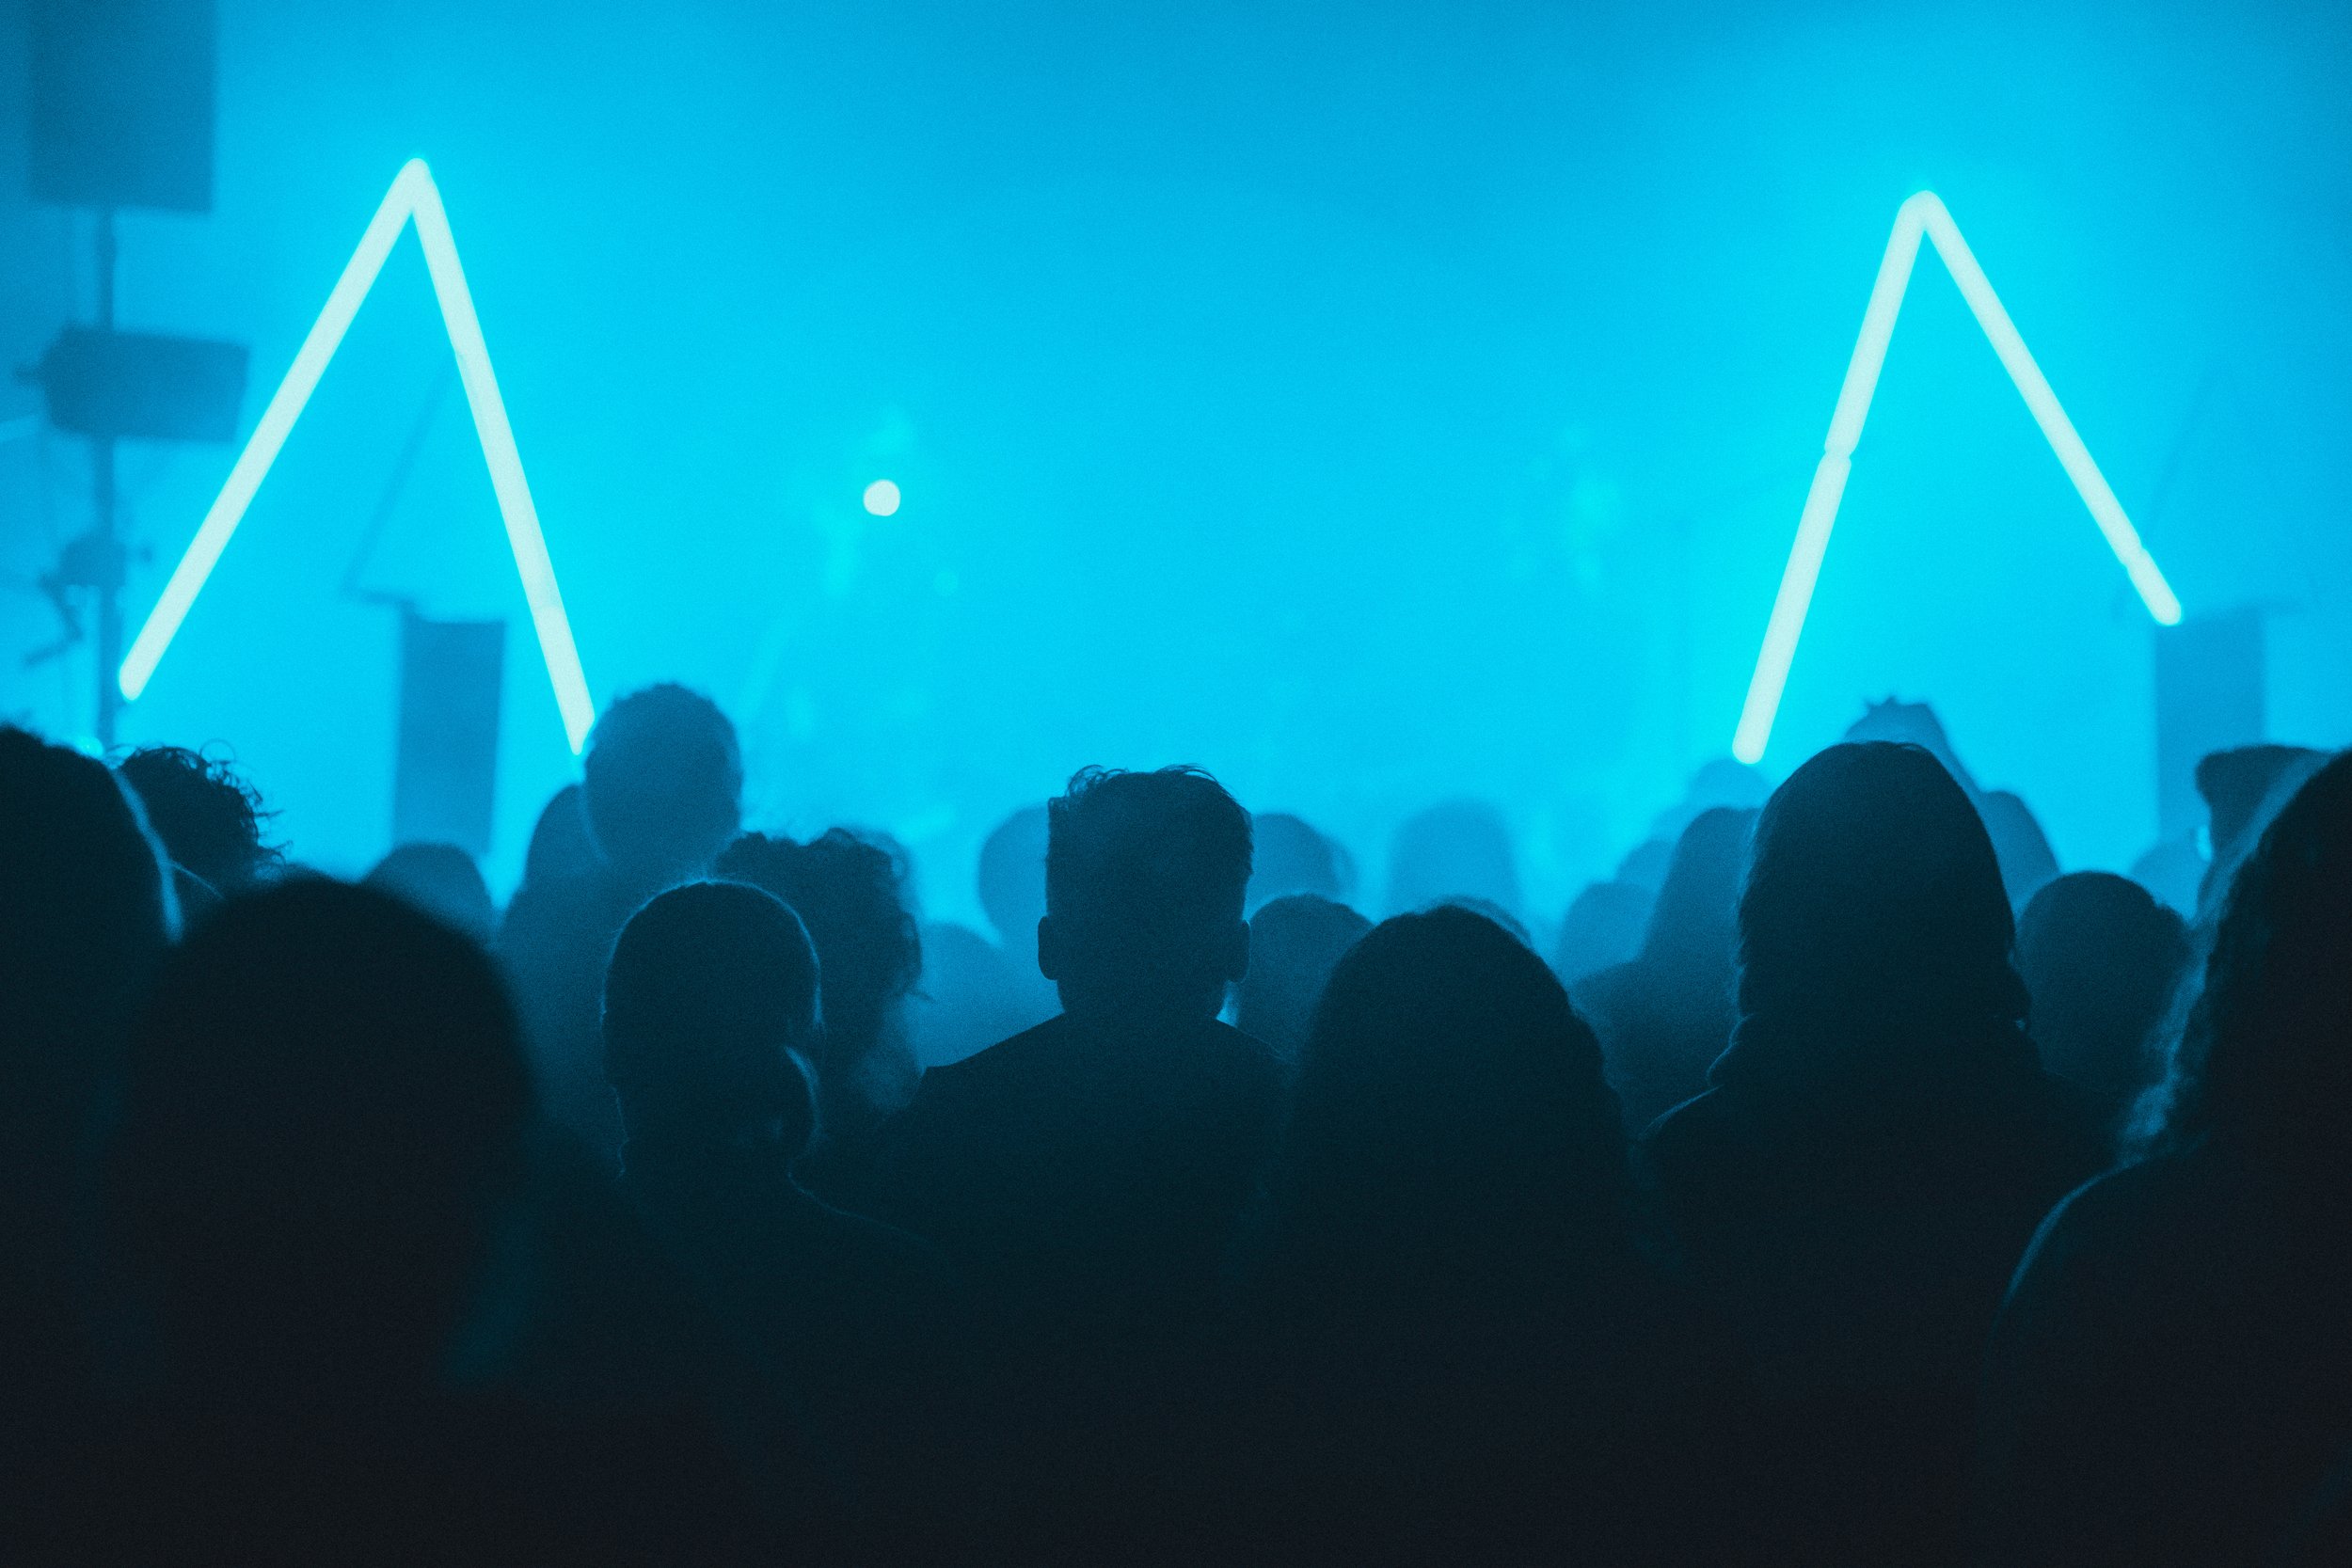 group of people in front of a stage with two blue triangles enjoying music